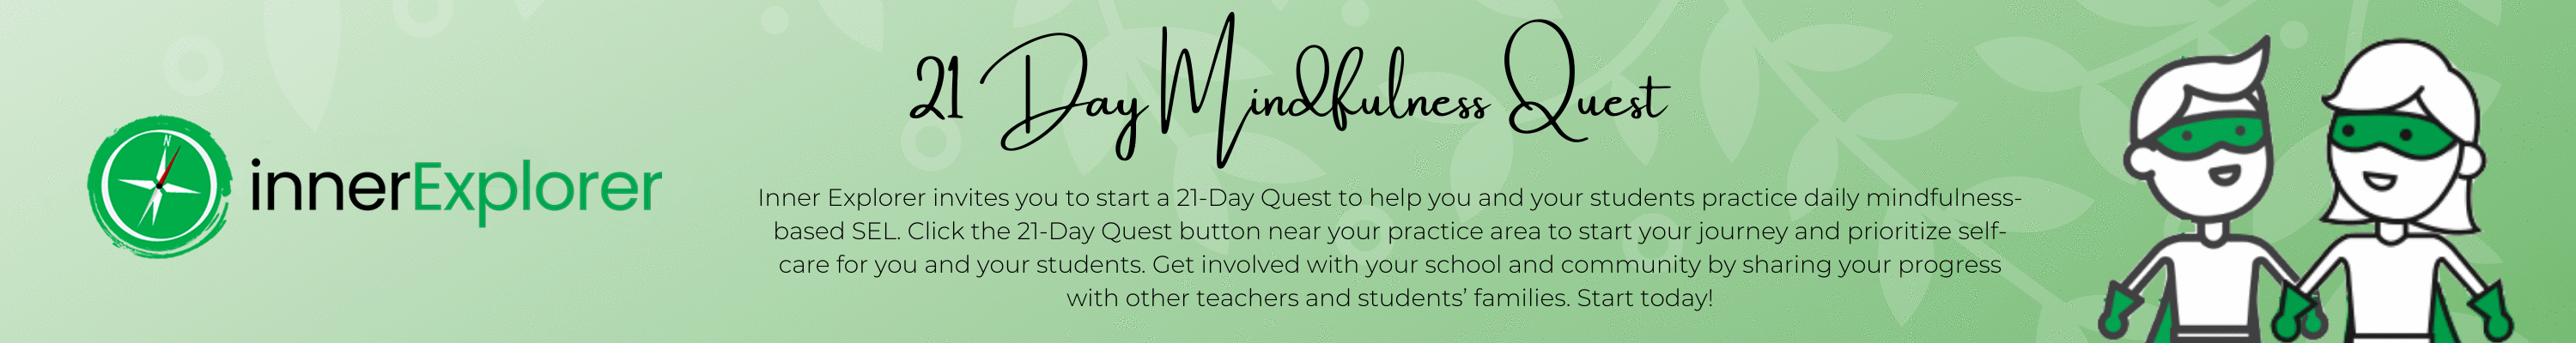 21 day mindfulness quest